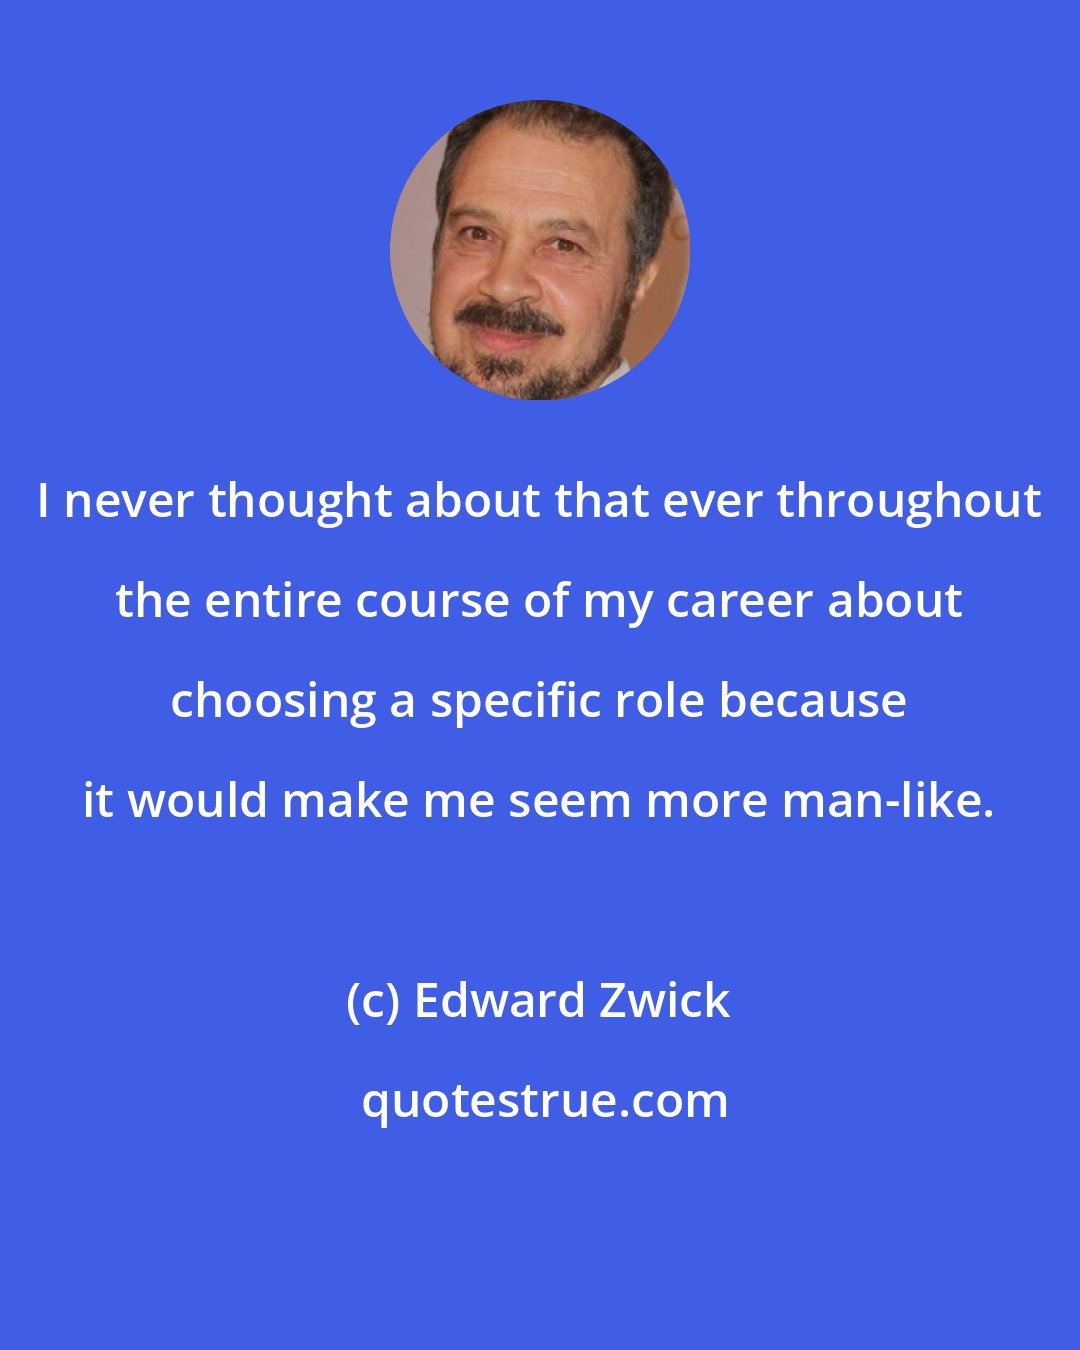 Edward Zwick: I never thought about that ever throughout the entire course of my career about choosing a specific role because it would make me seem more man-like.